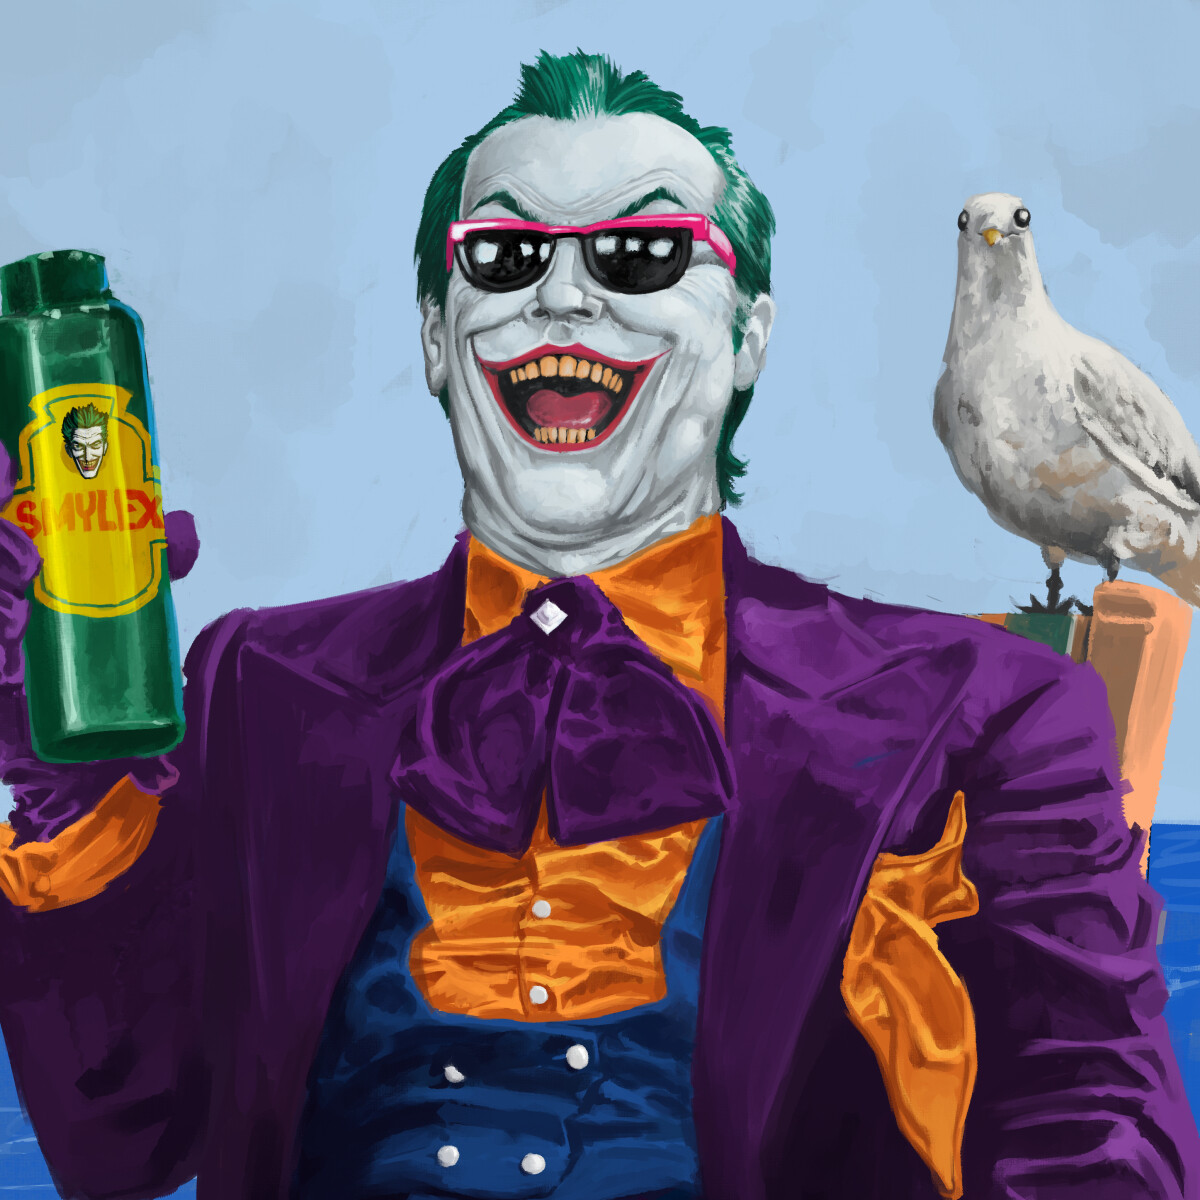 Jack Nicholson's Joker is about the best one out there. 